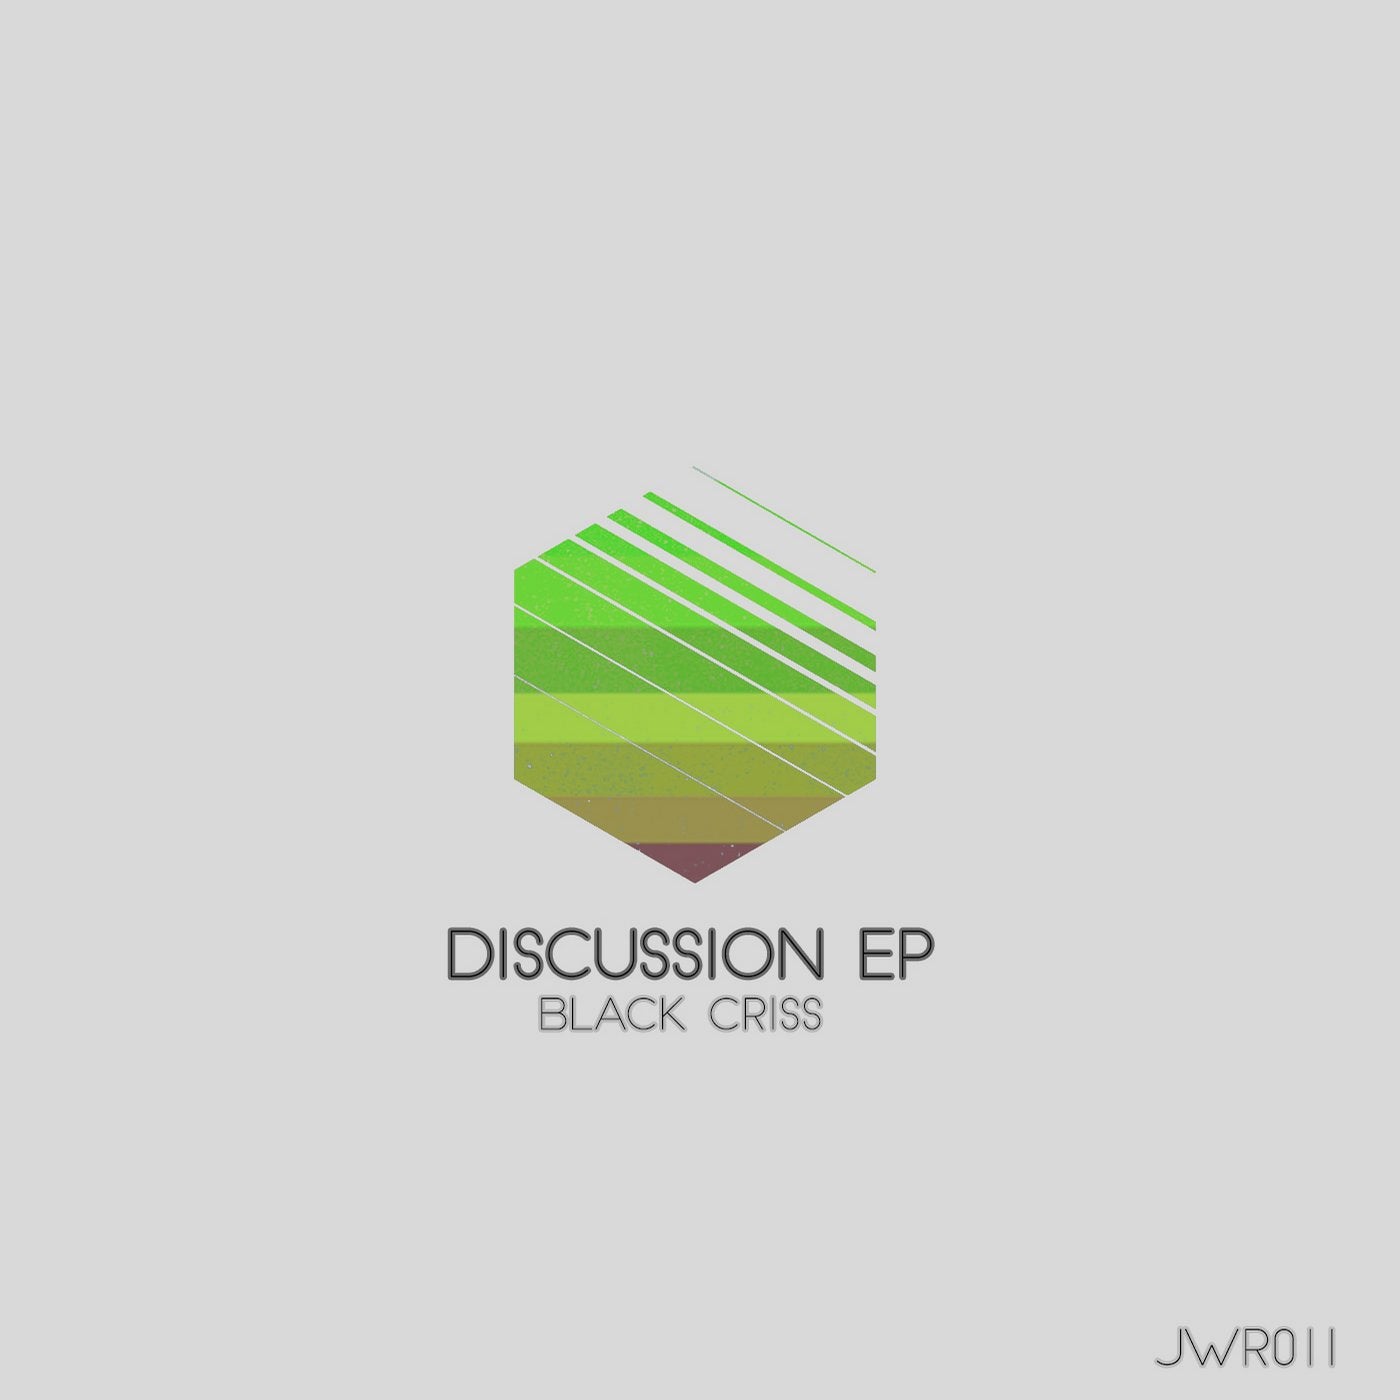 Discussion EP